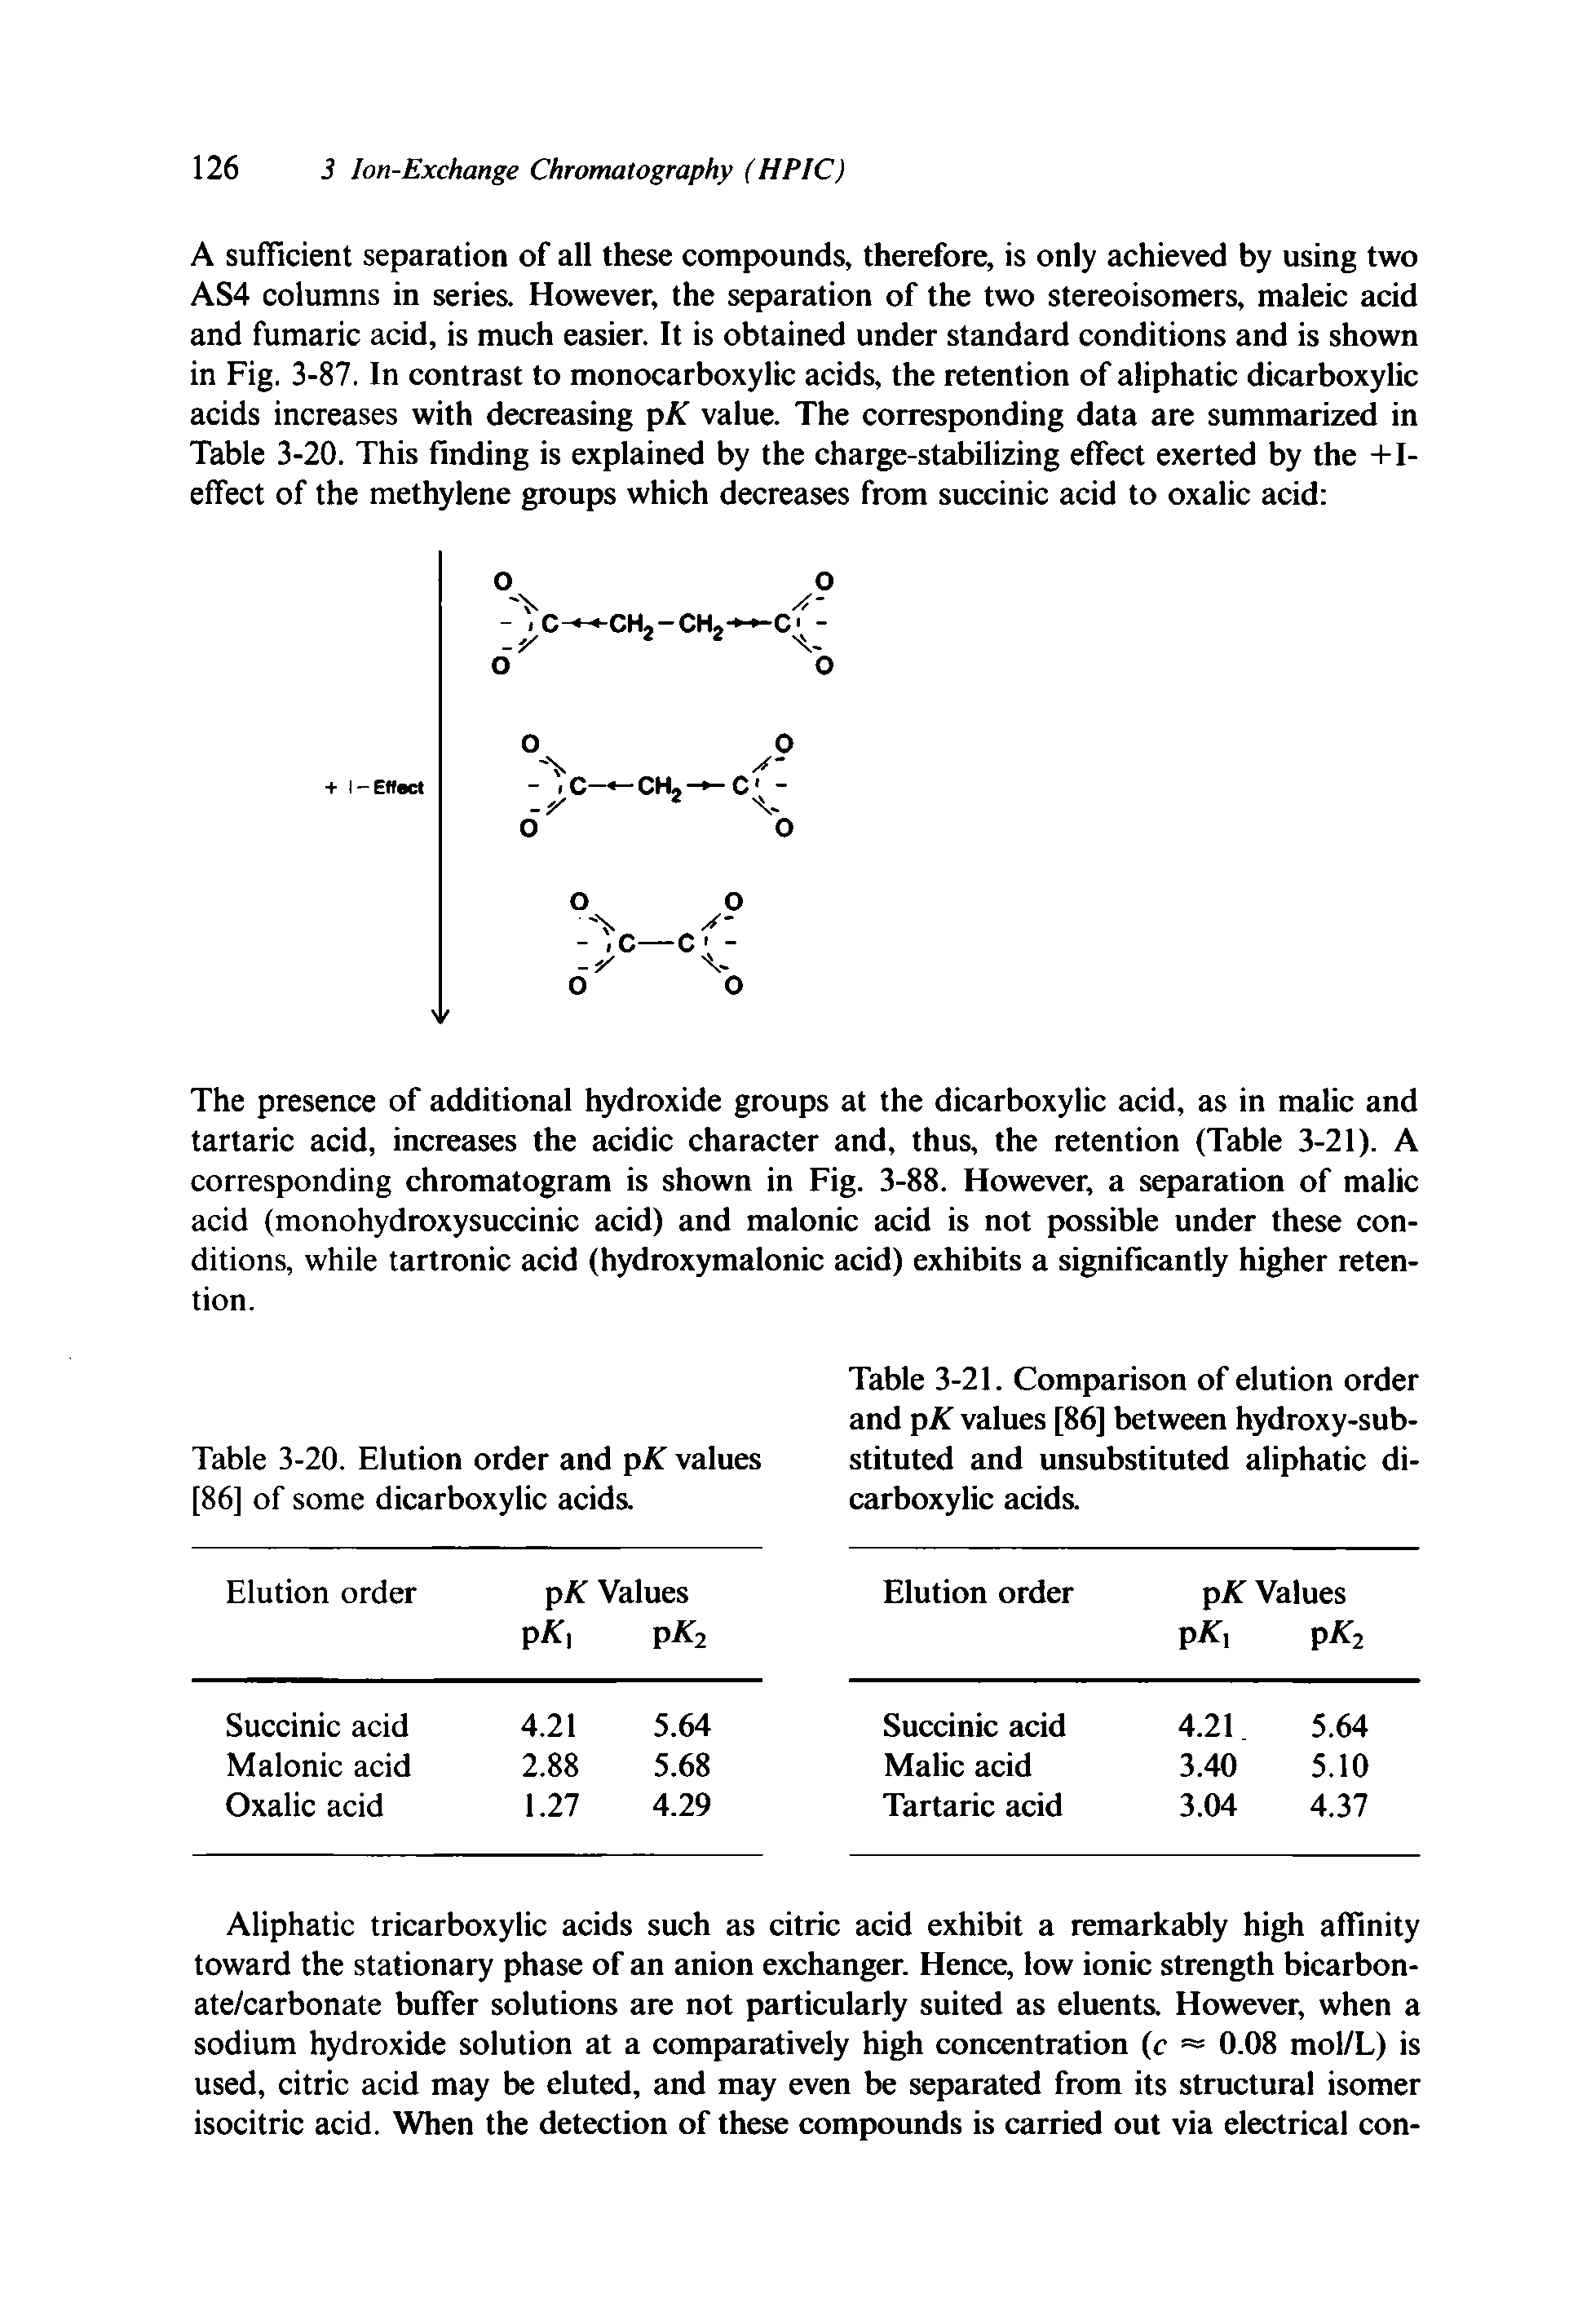 Table 3-21. Comparison of elution order and pK values [86] between hydroxy-substituted and unsubstituted aliphatic dicarboxylic acids.